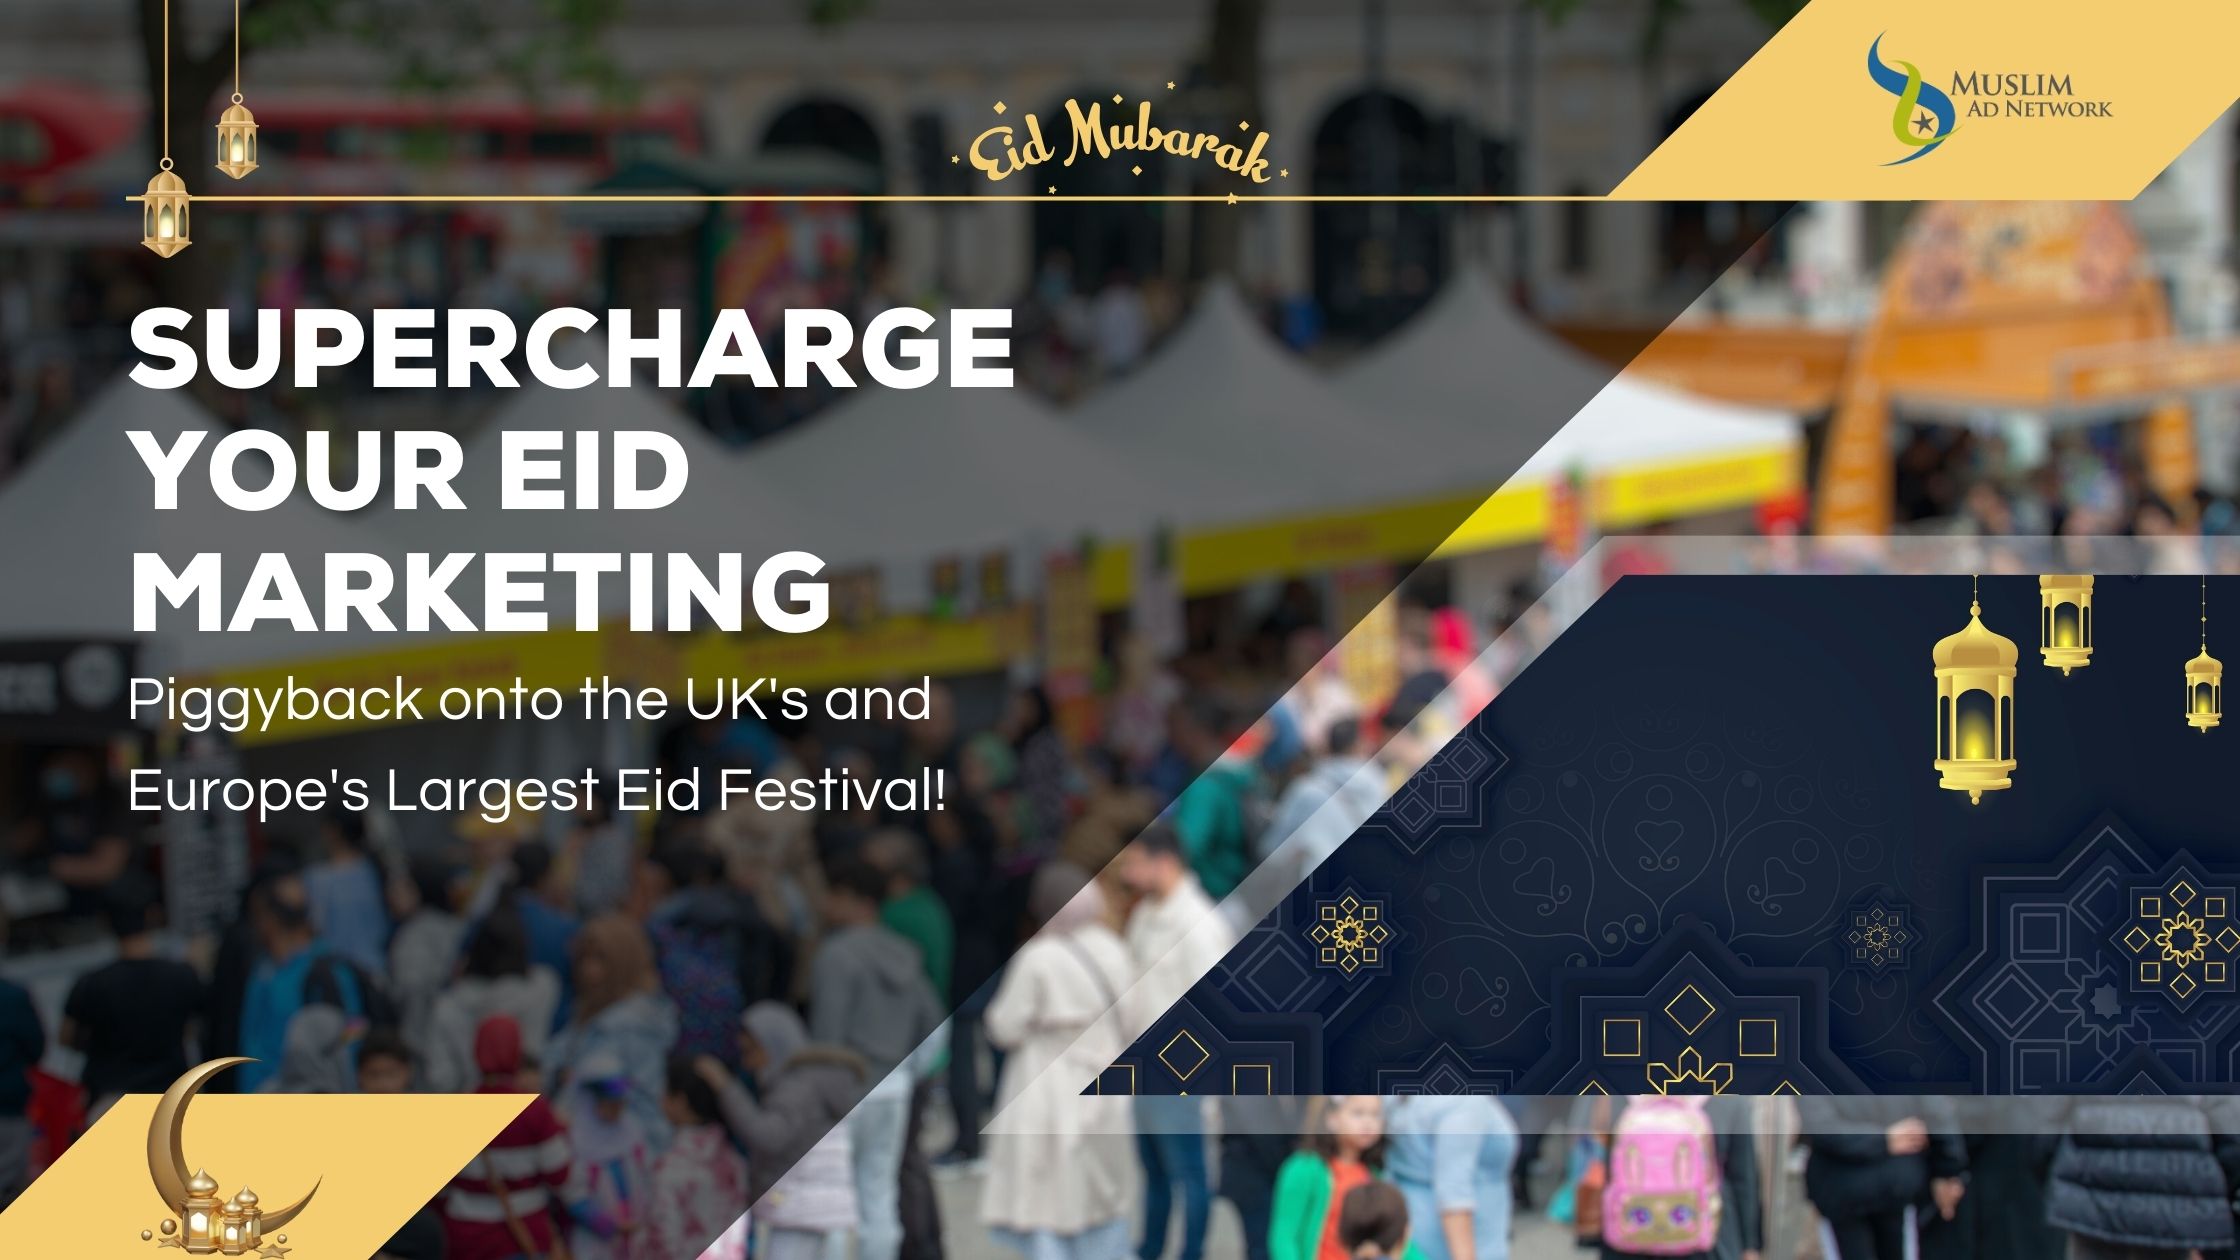 Supercharge Your Eid Marketing by Piggybacking onto the UK's and Europe's Largest Eid Festival!